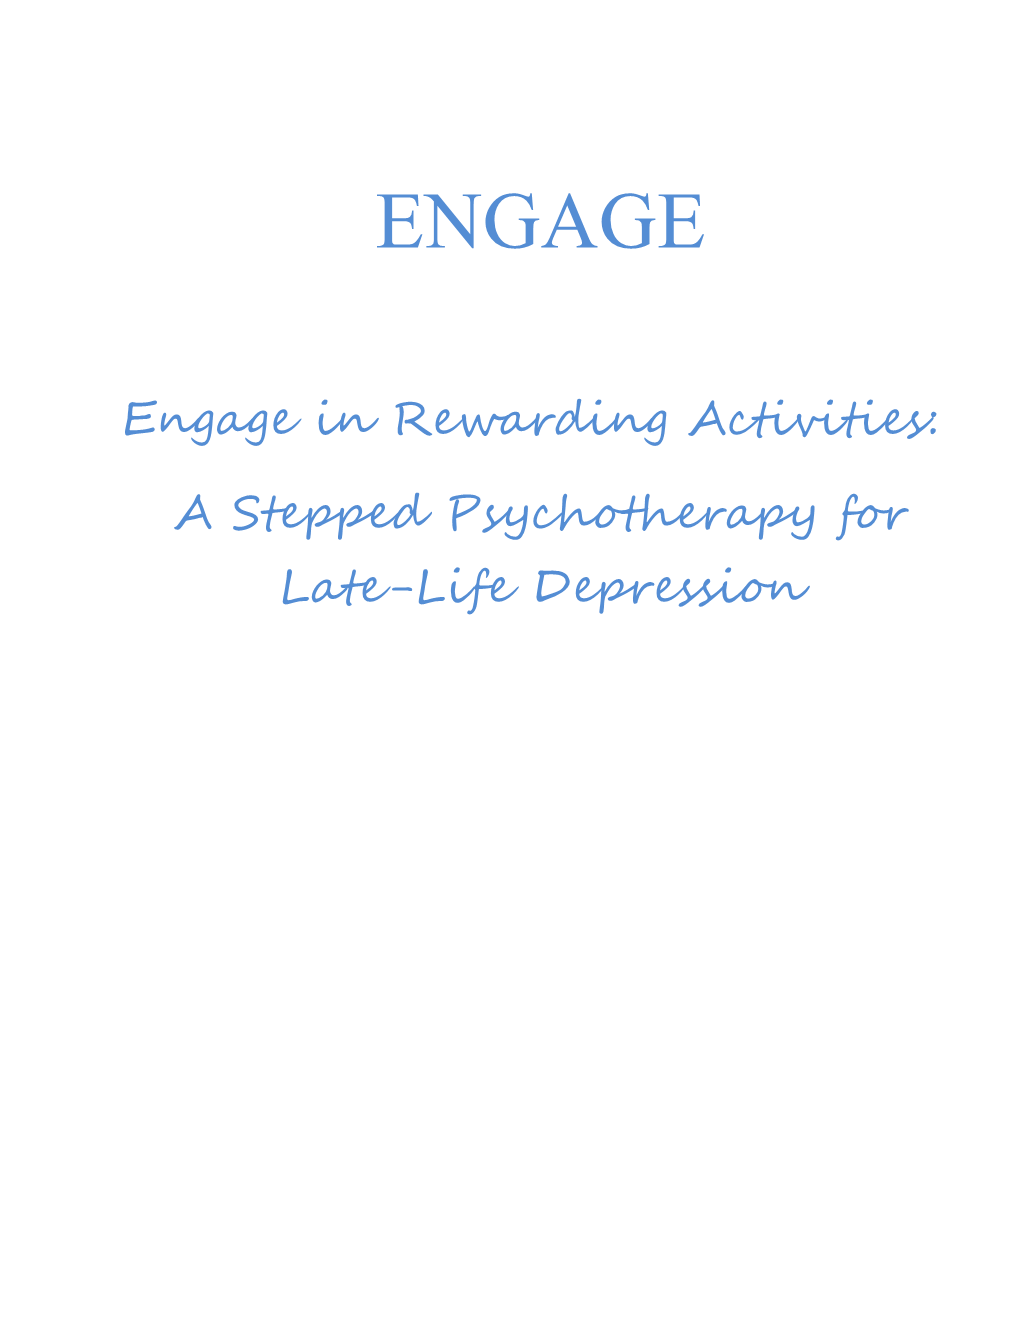 Astepped Psychotherapy for Late-Life Depression